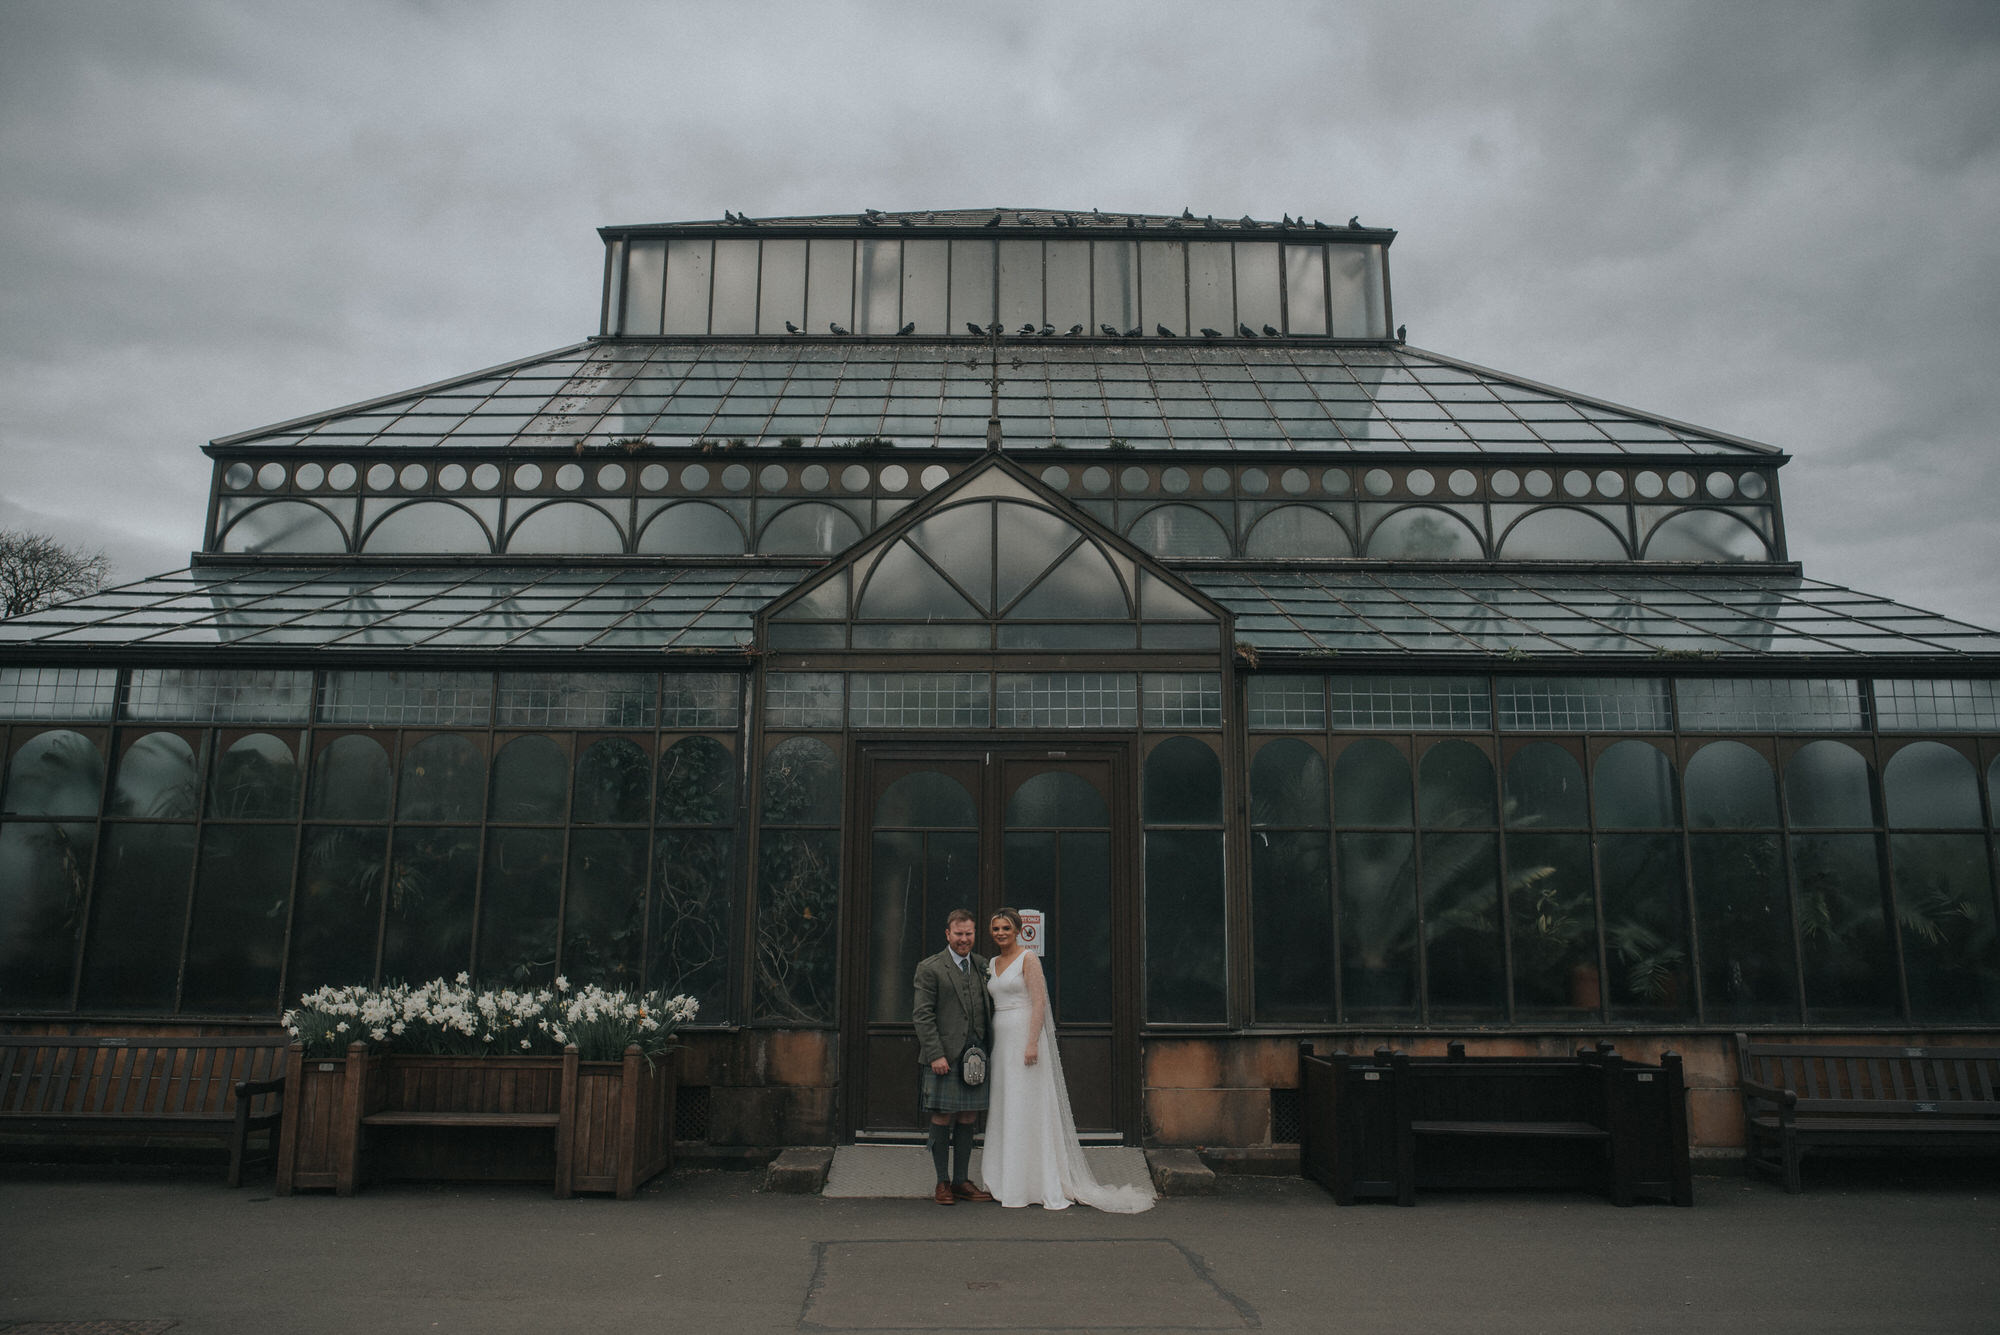 The bride and groom stand in front of a large, ornate green house